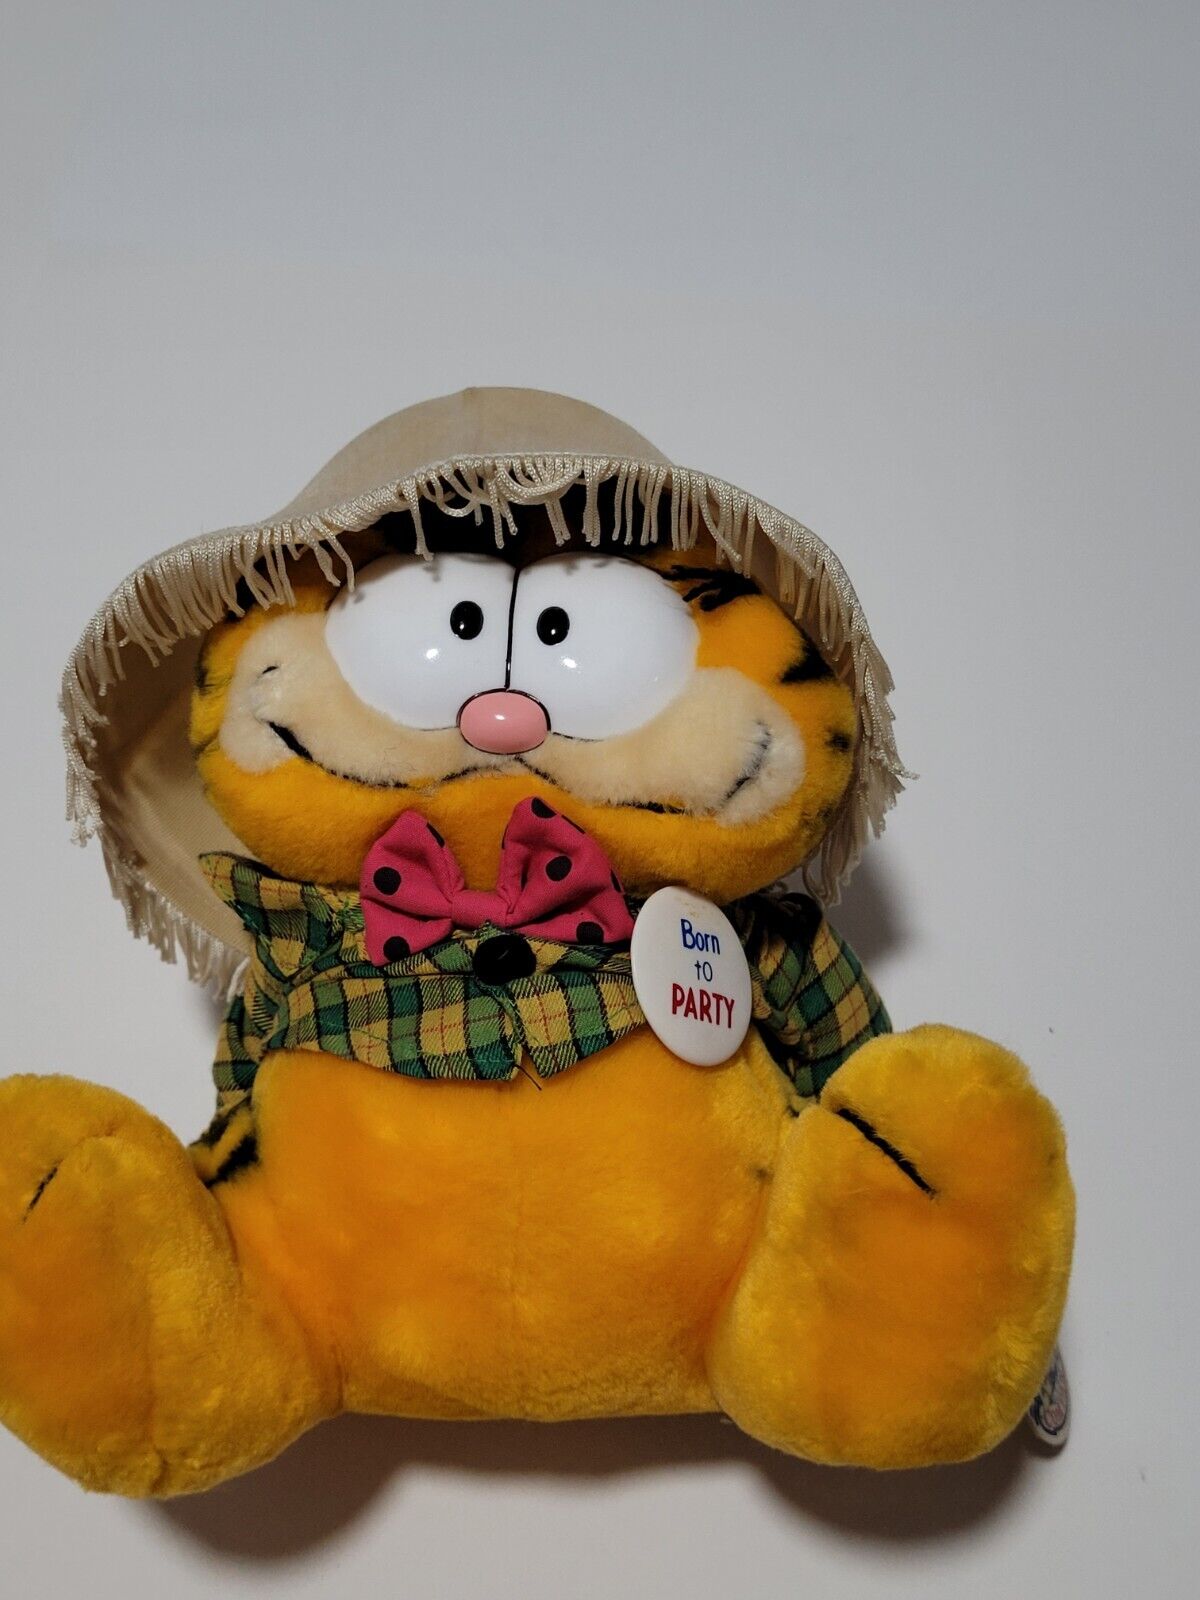 Vintage Garfield Born to Party, Dakin Lamp Shade On Head Plush With Tags 1981